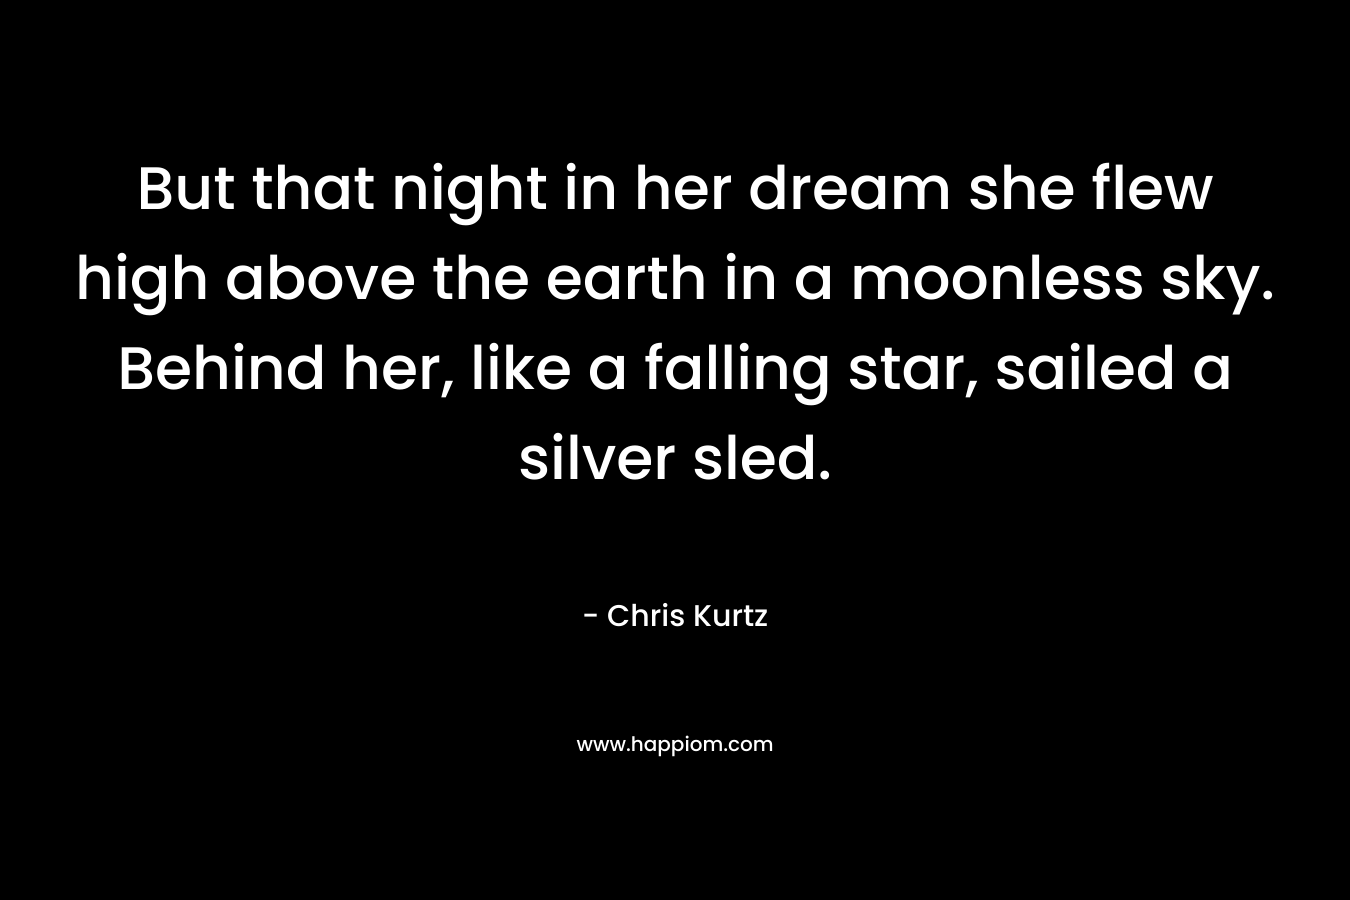 But that night in her dream she flew high above the earth in a moonless sky. Behind her, like a falling star, sailed a silver sled.